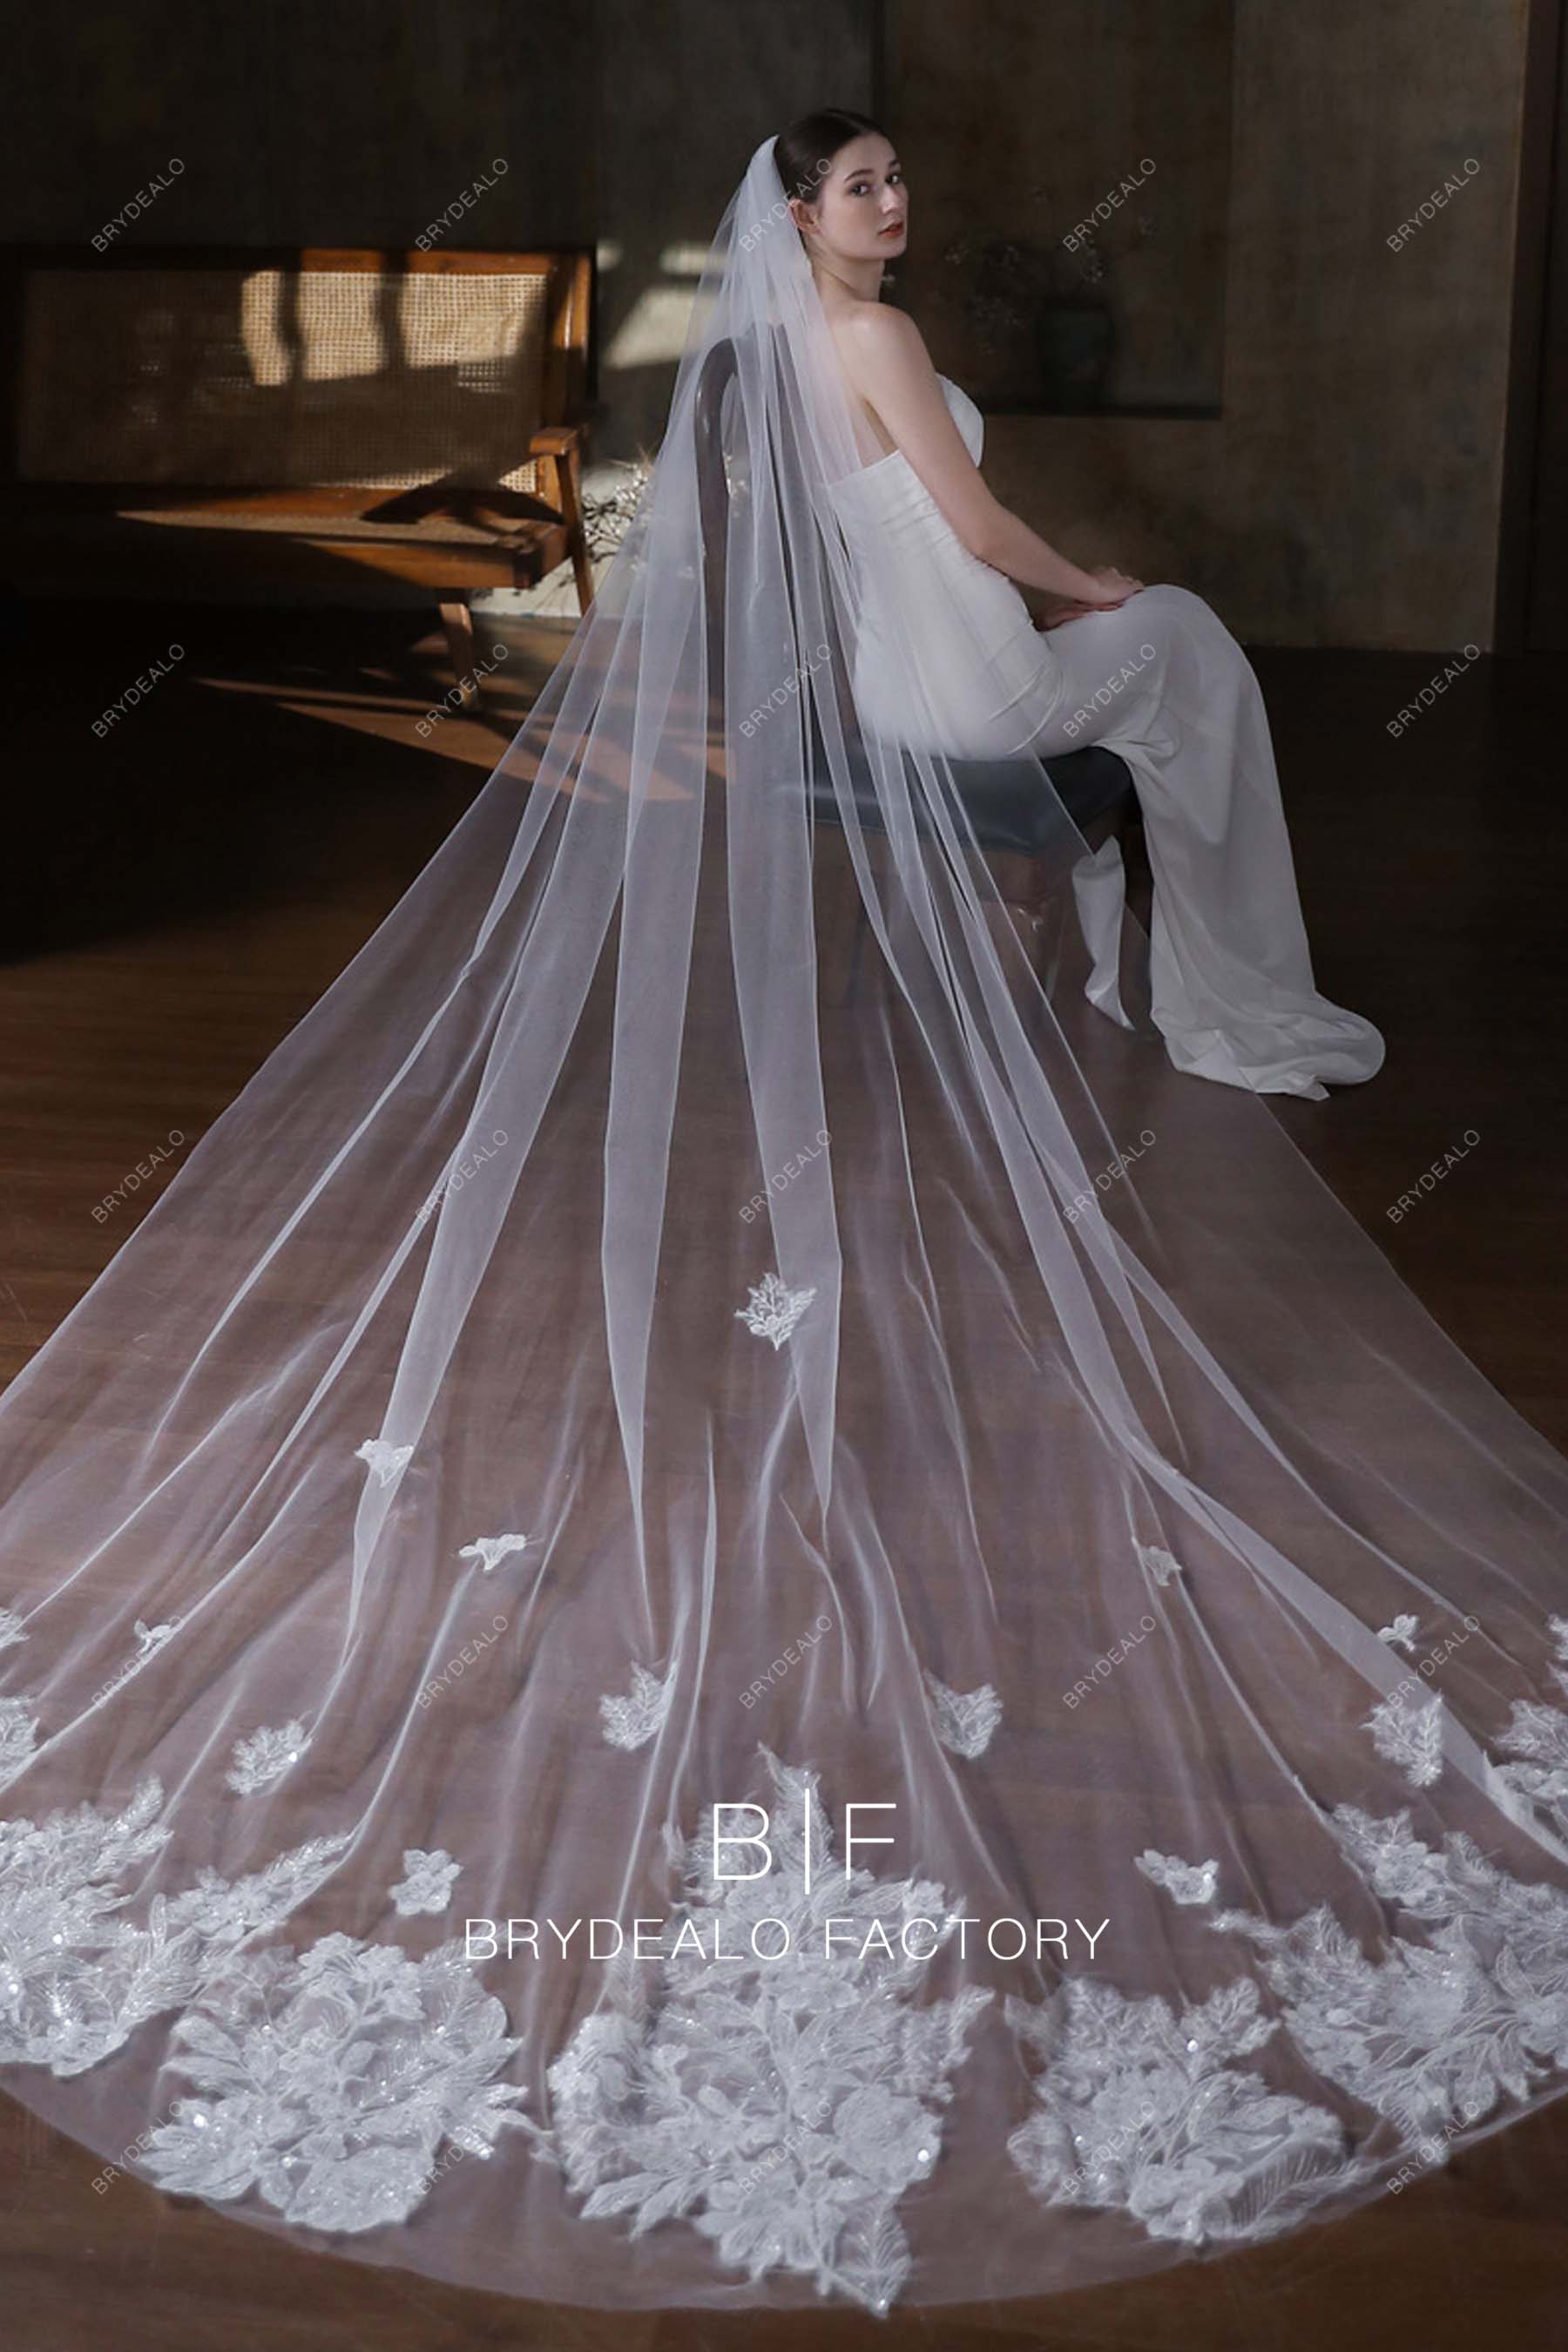 Shimmer Wild Lace Cathedral Length Bridal Veil